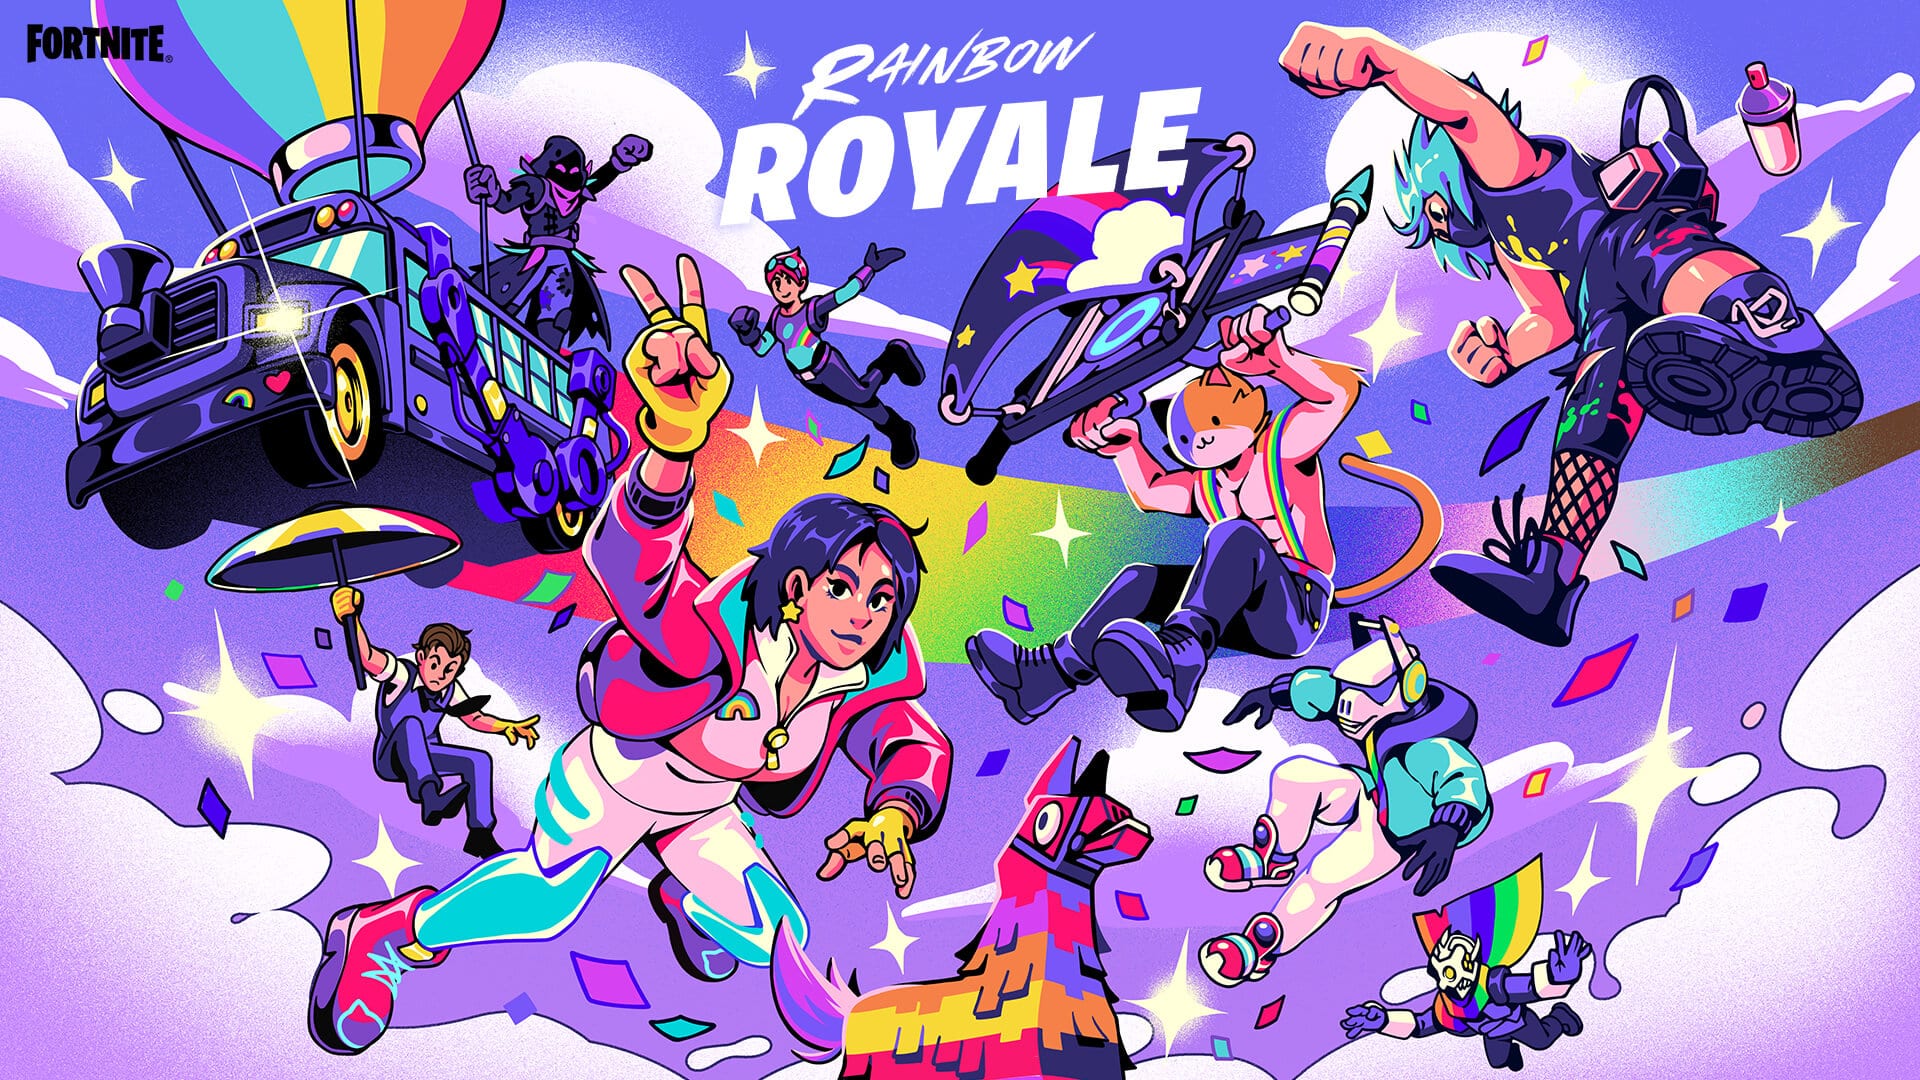 Rainbow Royale returns for a second year in Fortnite Gayming Magazine